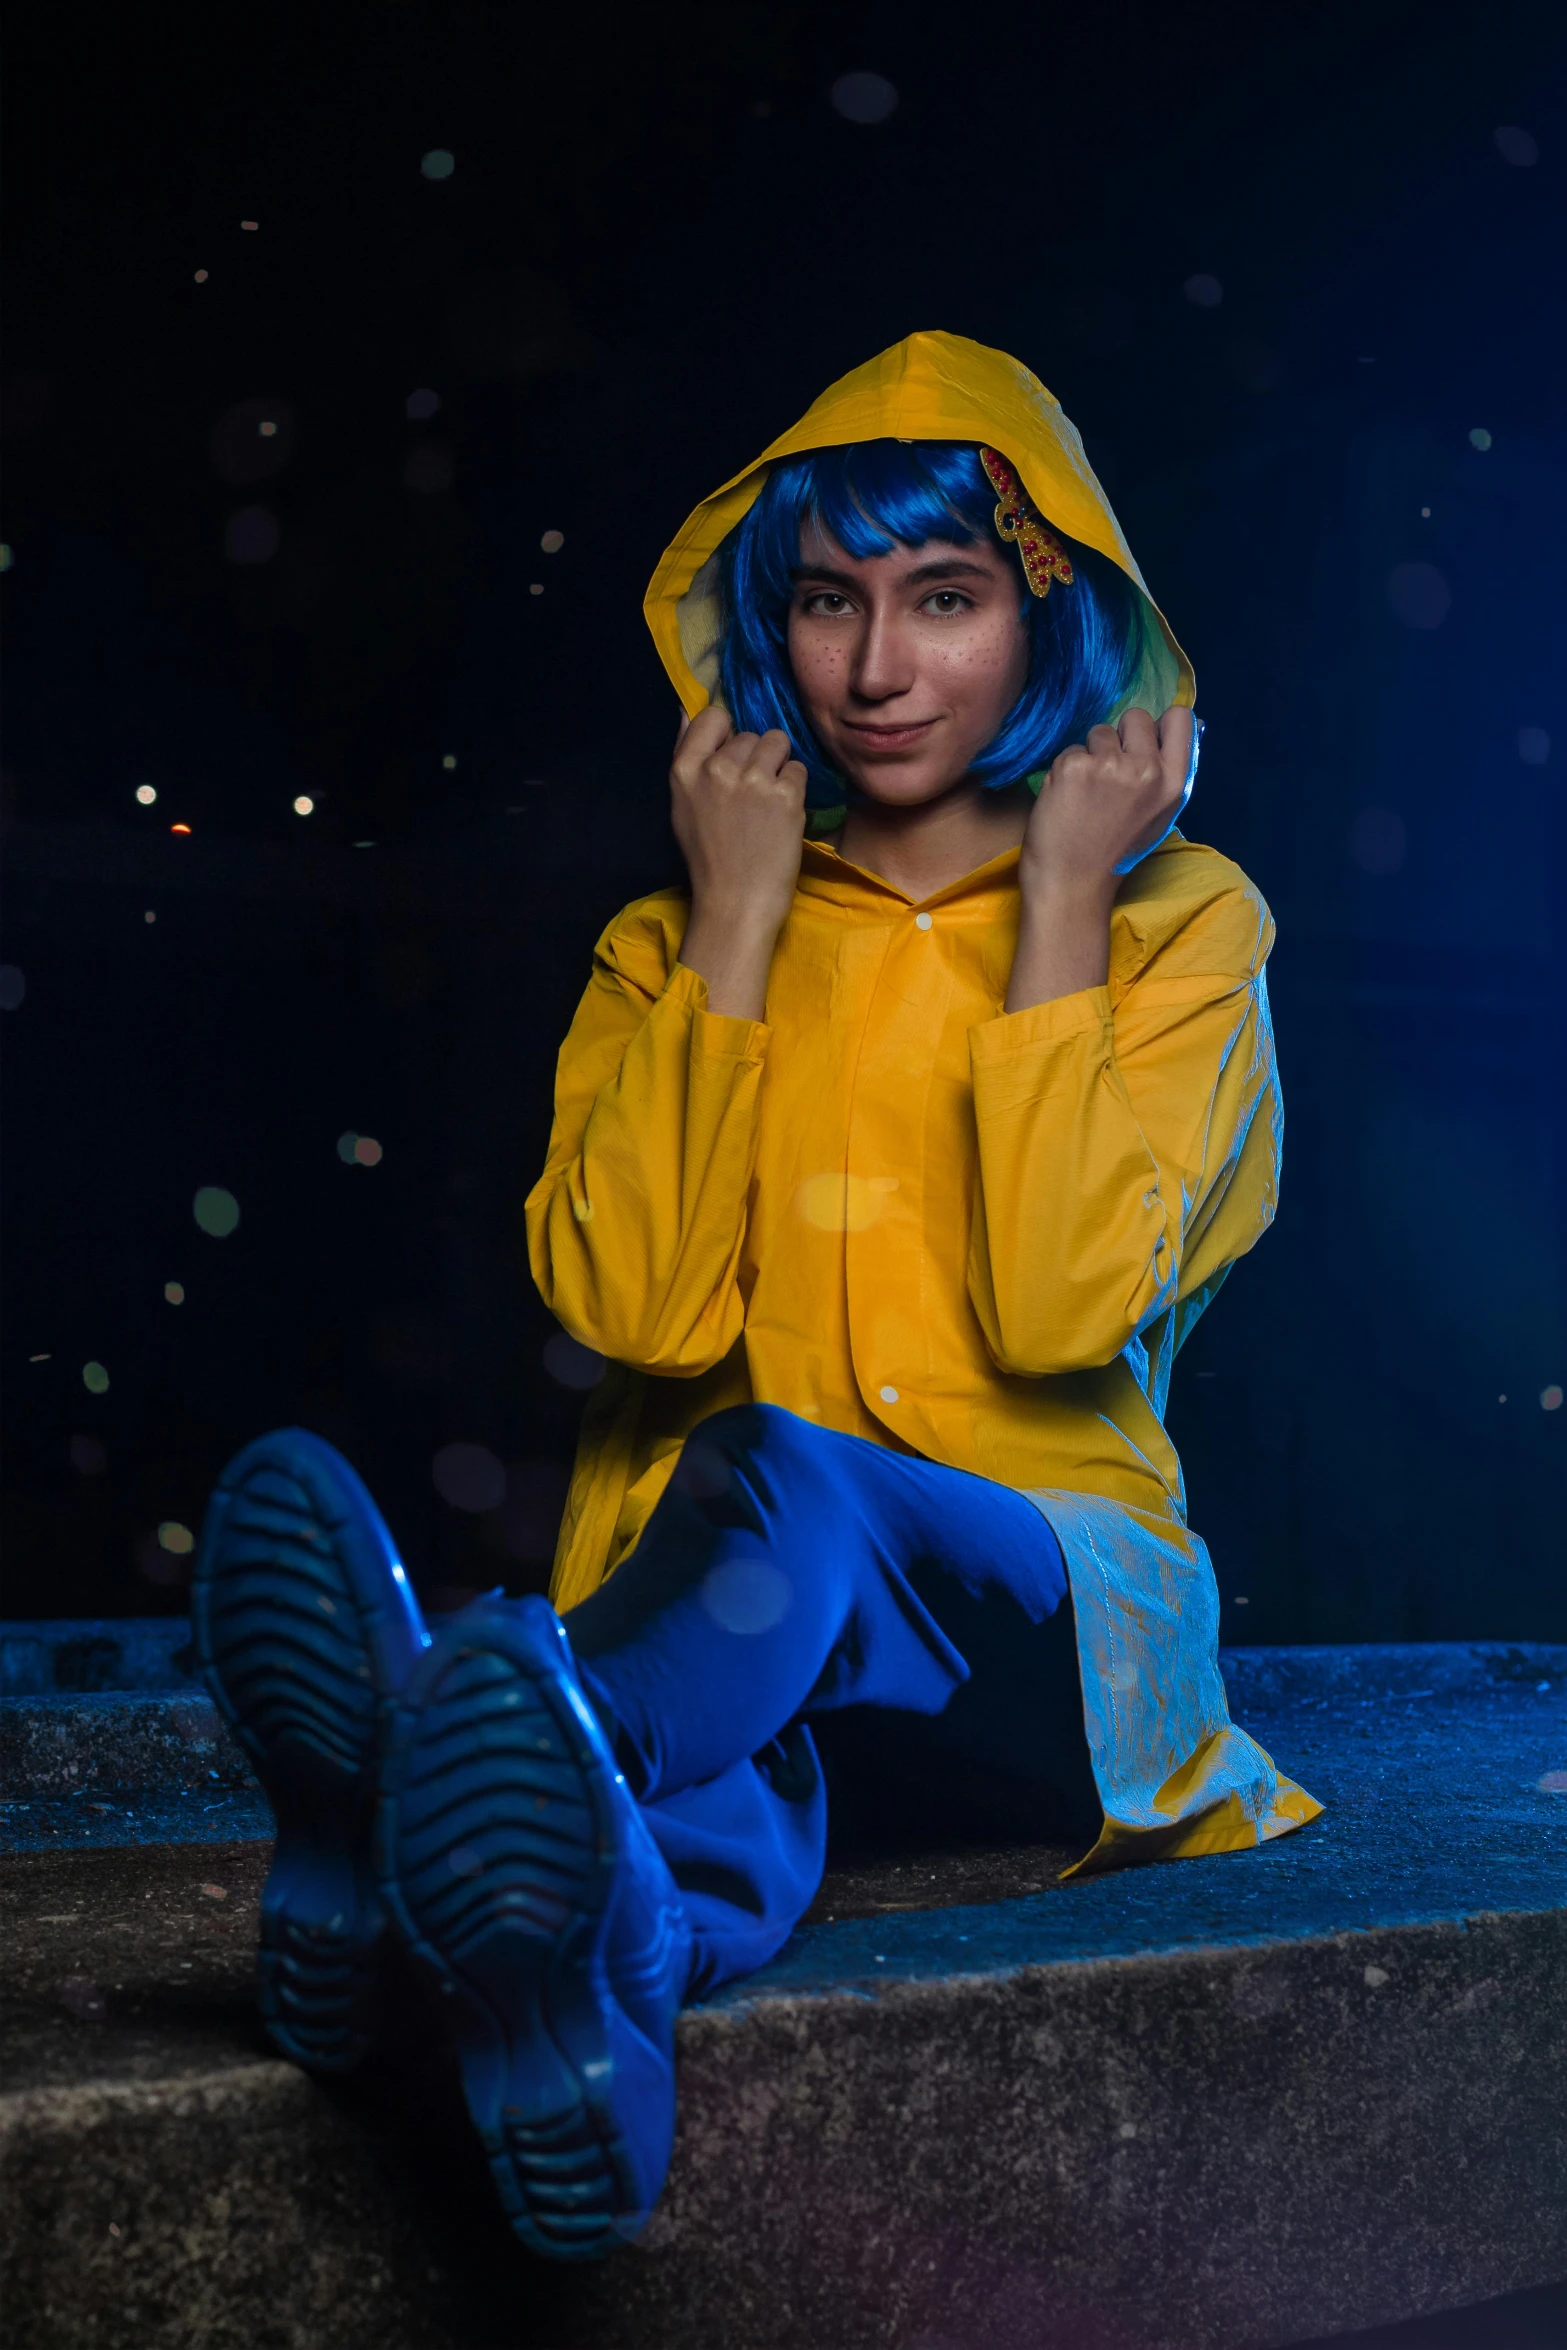 a woman with blue hair wearing a yellow jacket is sitting on a wall